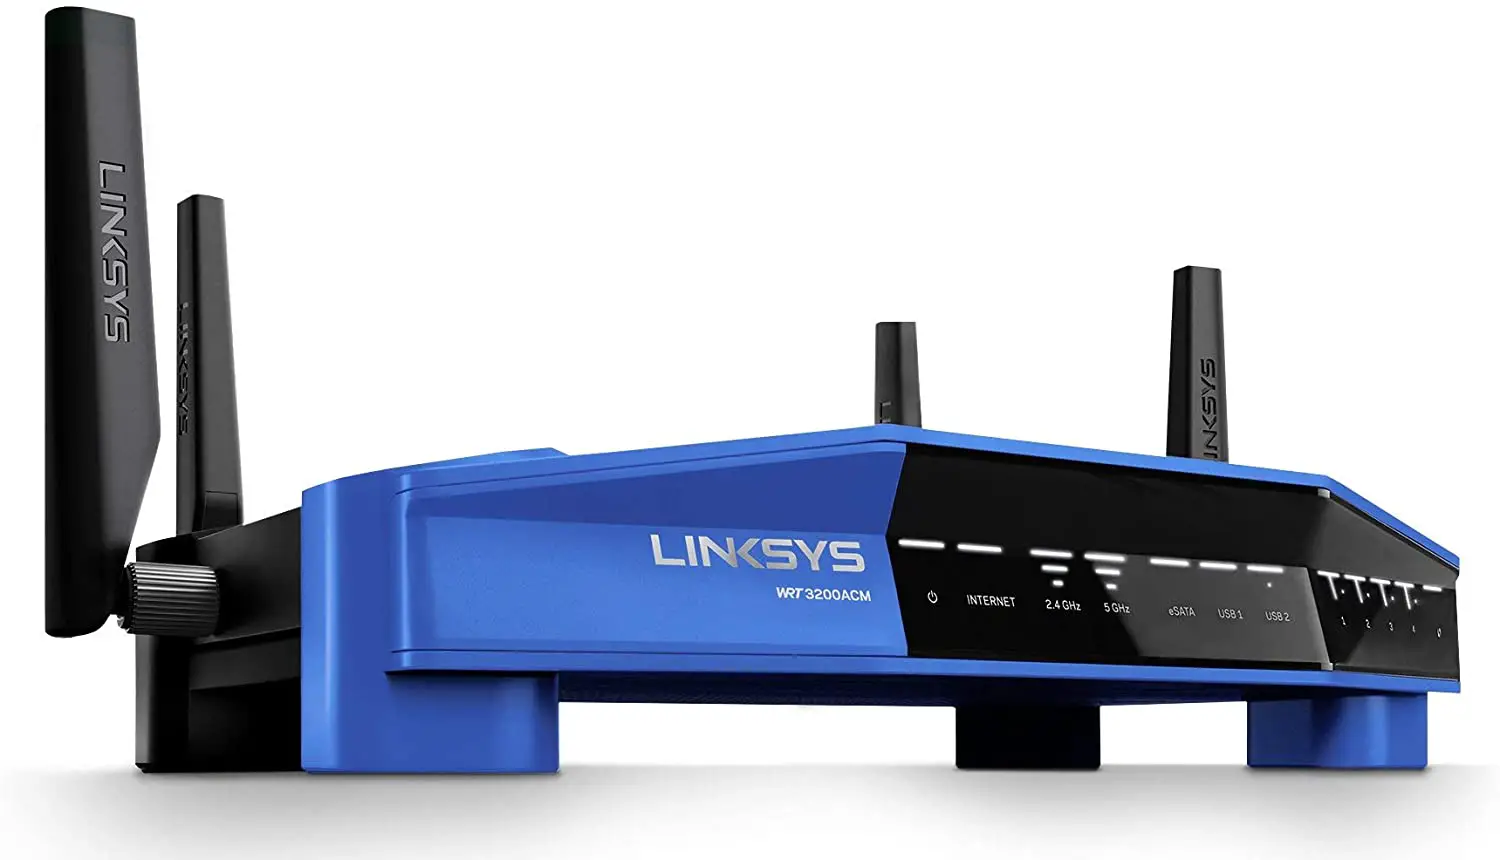 Linksys WRT3200ACM Tri-Band Router